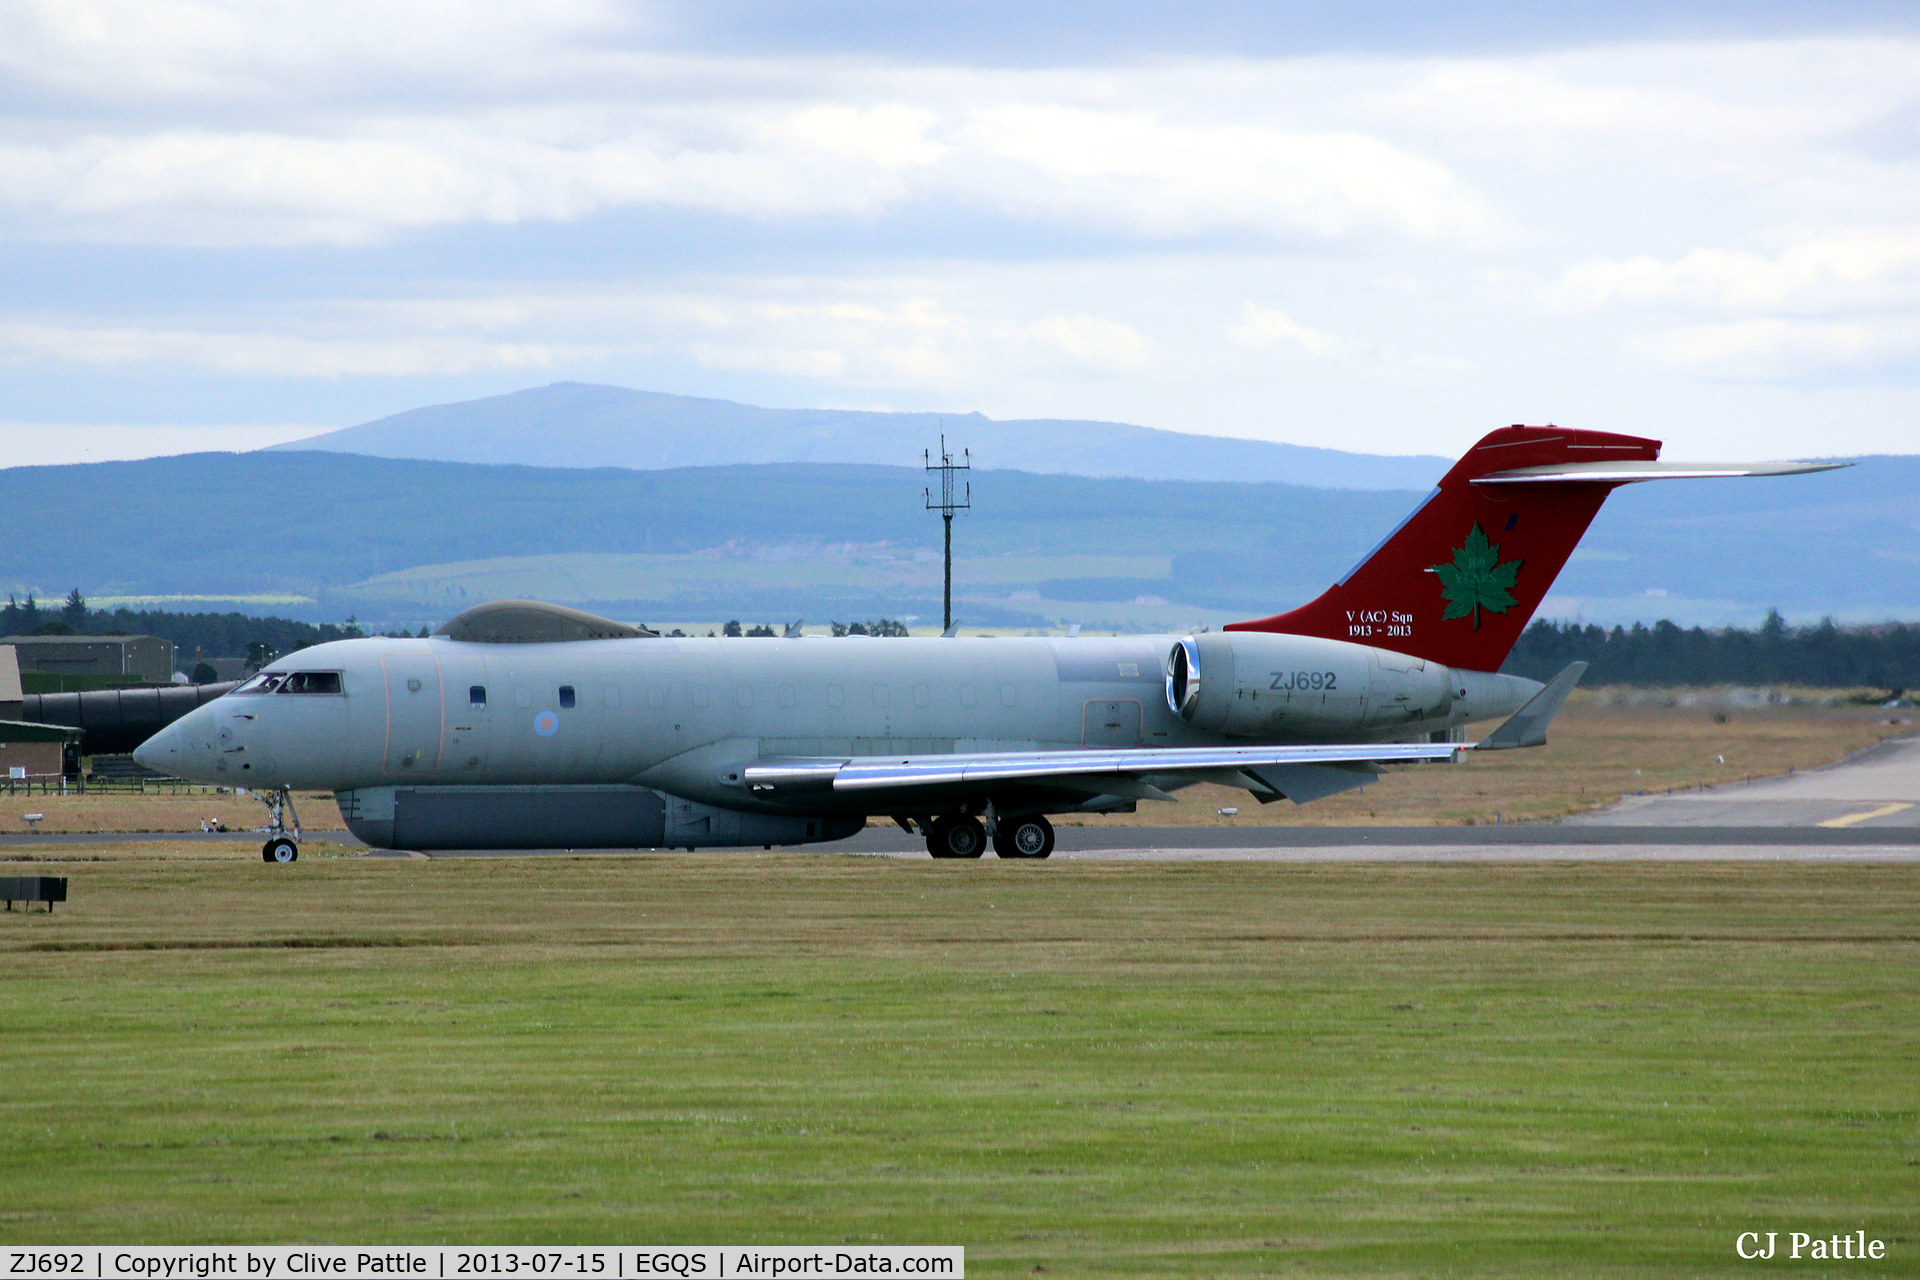 ZJ692, 2008 Bombardier BD-700-1A10 Sentinel R1 C/N 9131, Lossiemouth duty. Special Anniversary tail markings